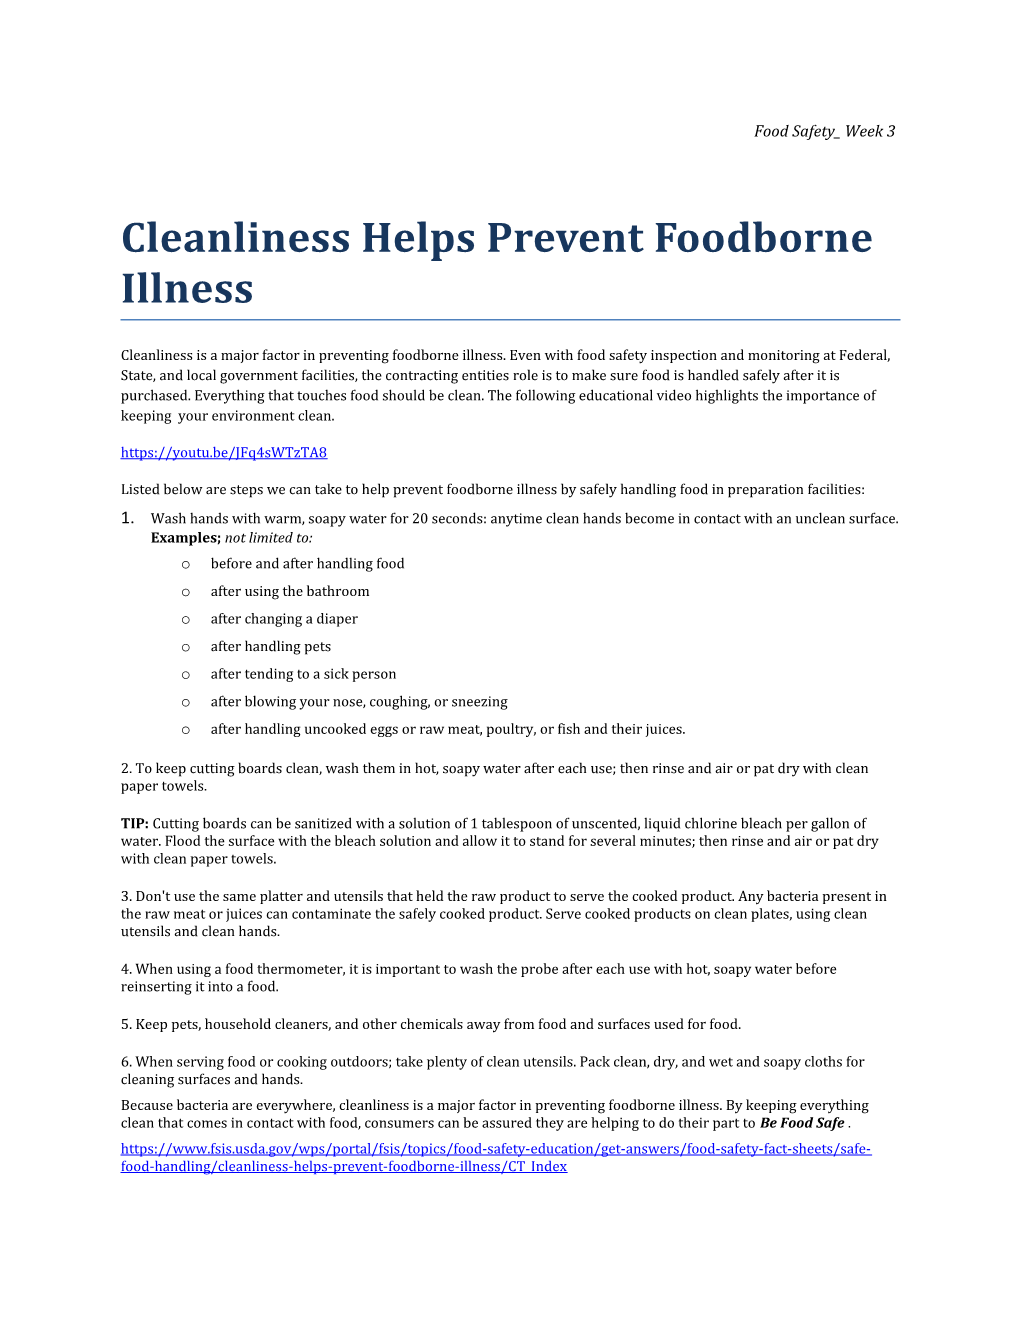 Cleanliness Helps Prevent Foodborne Illness